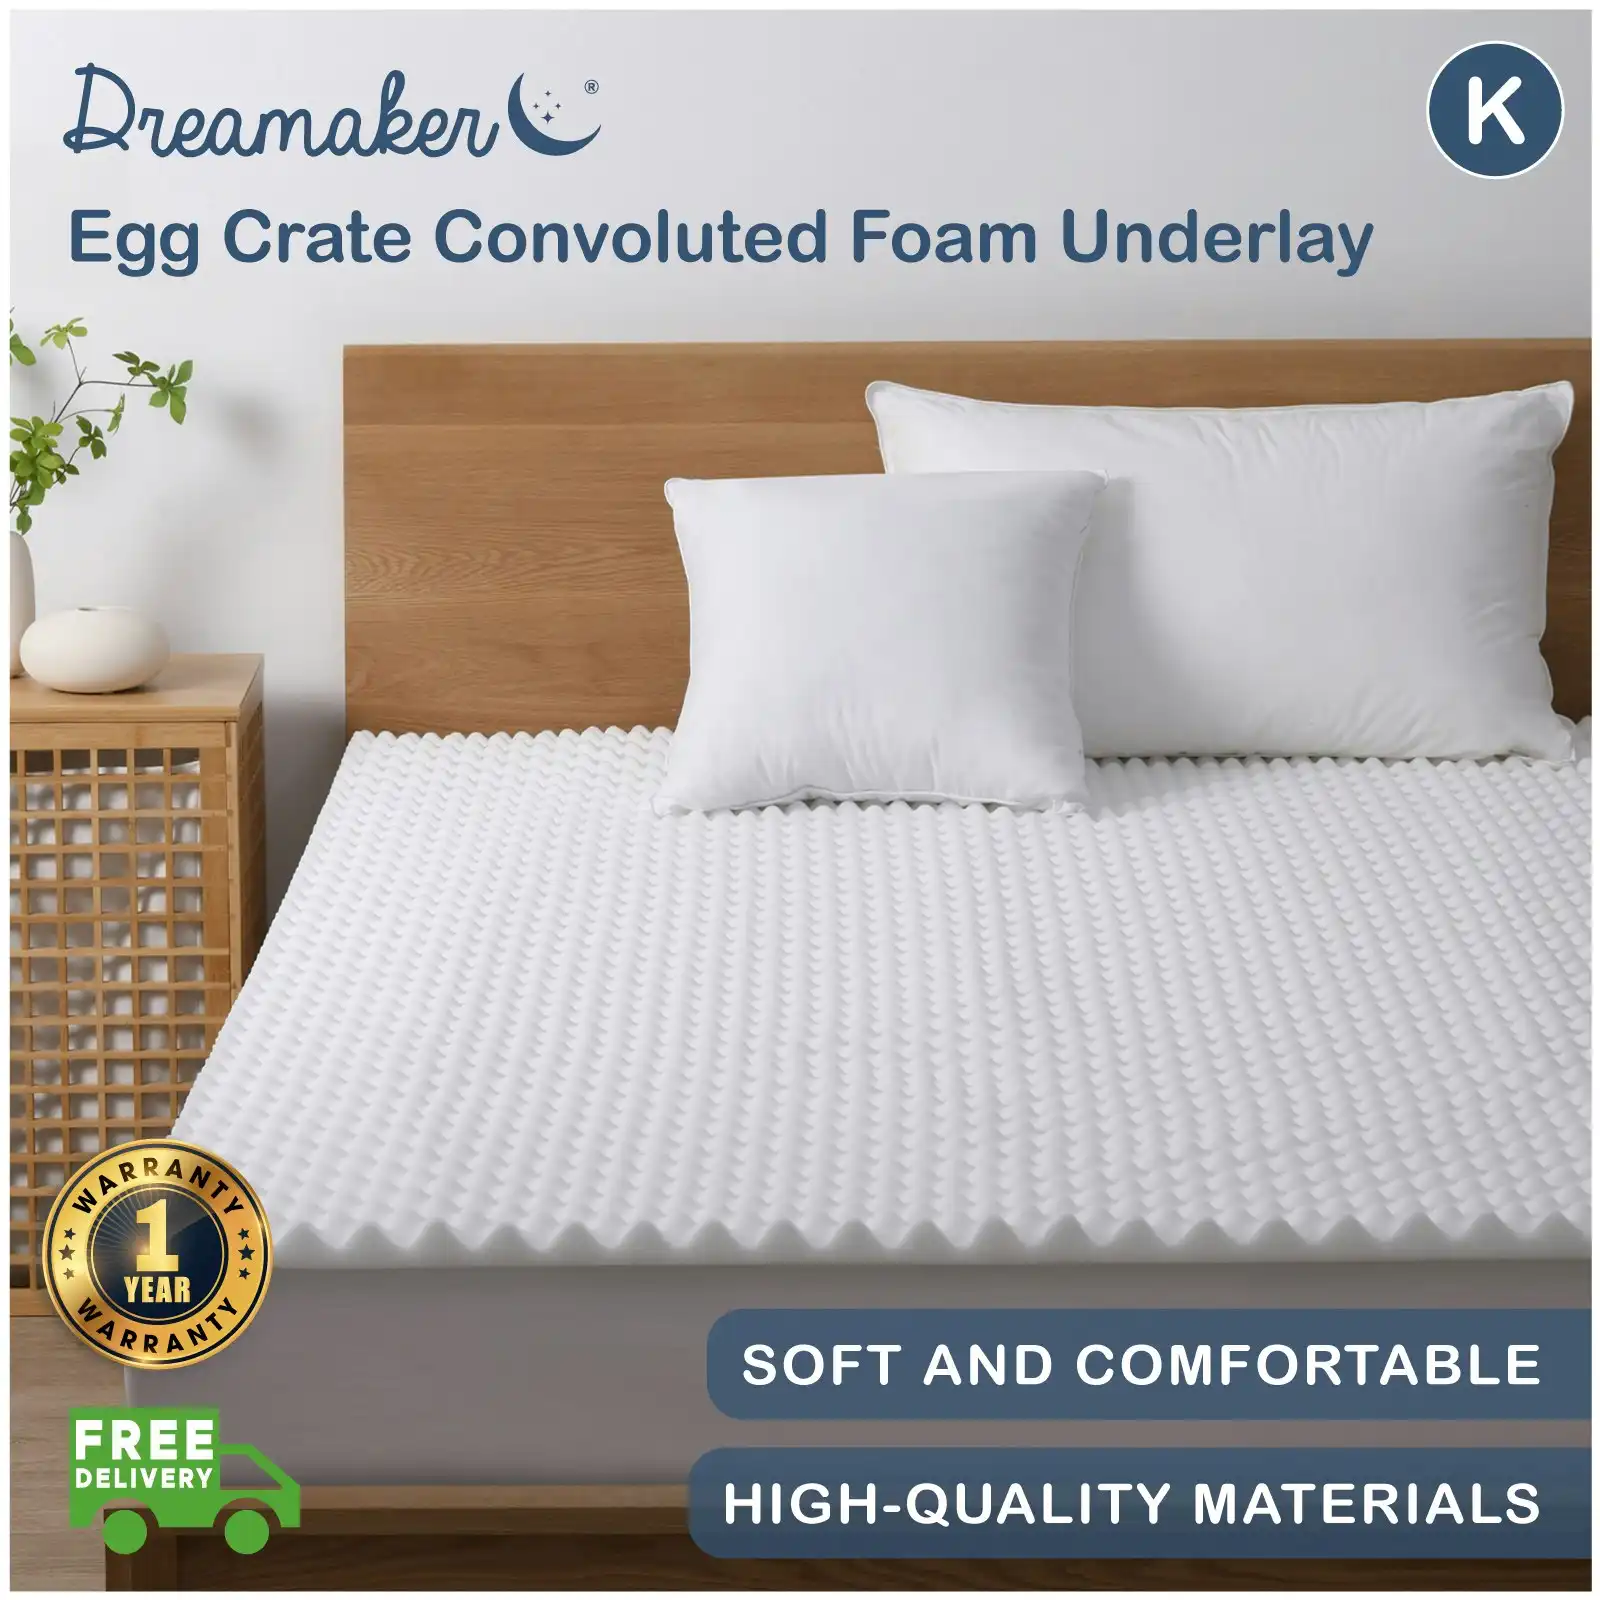 Dreamaker Egg Crate Convoluted Foam Underlay King Bed